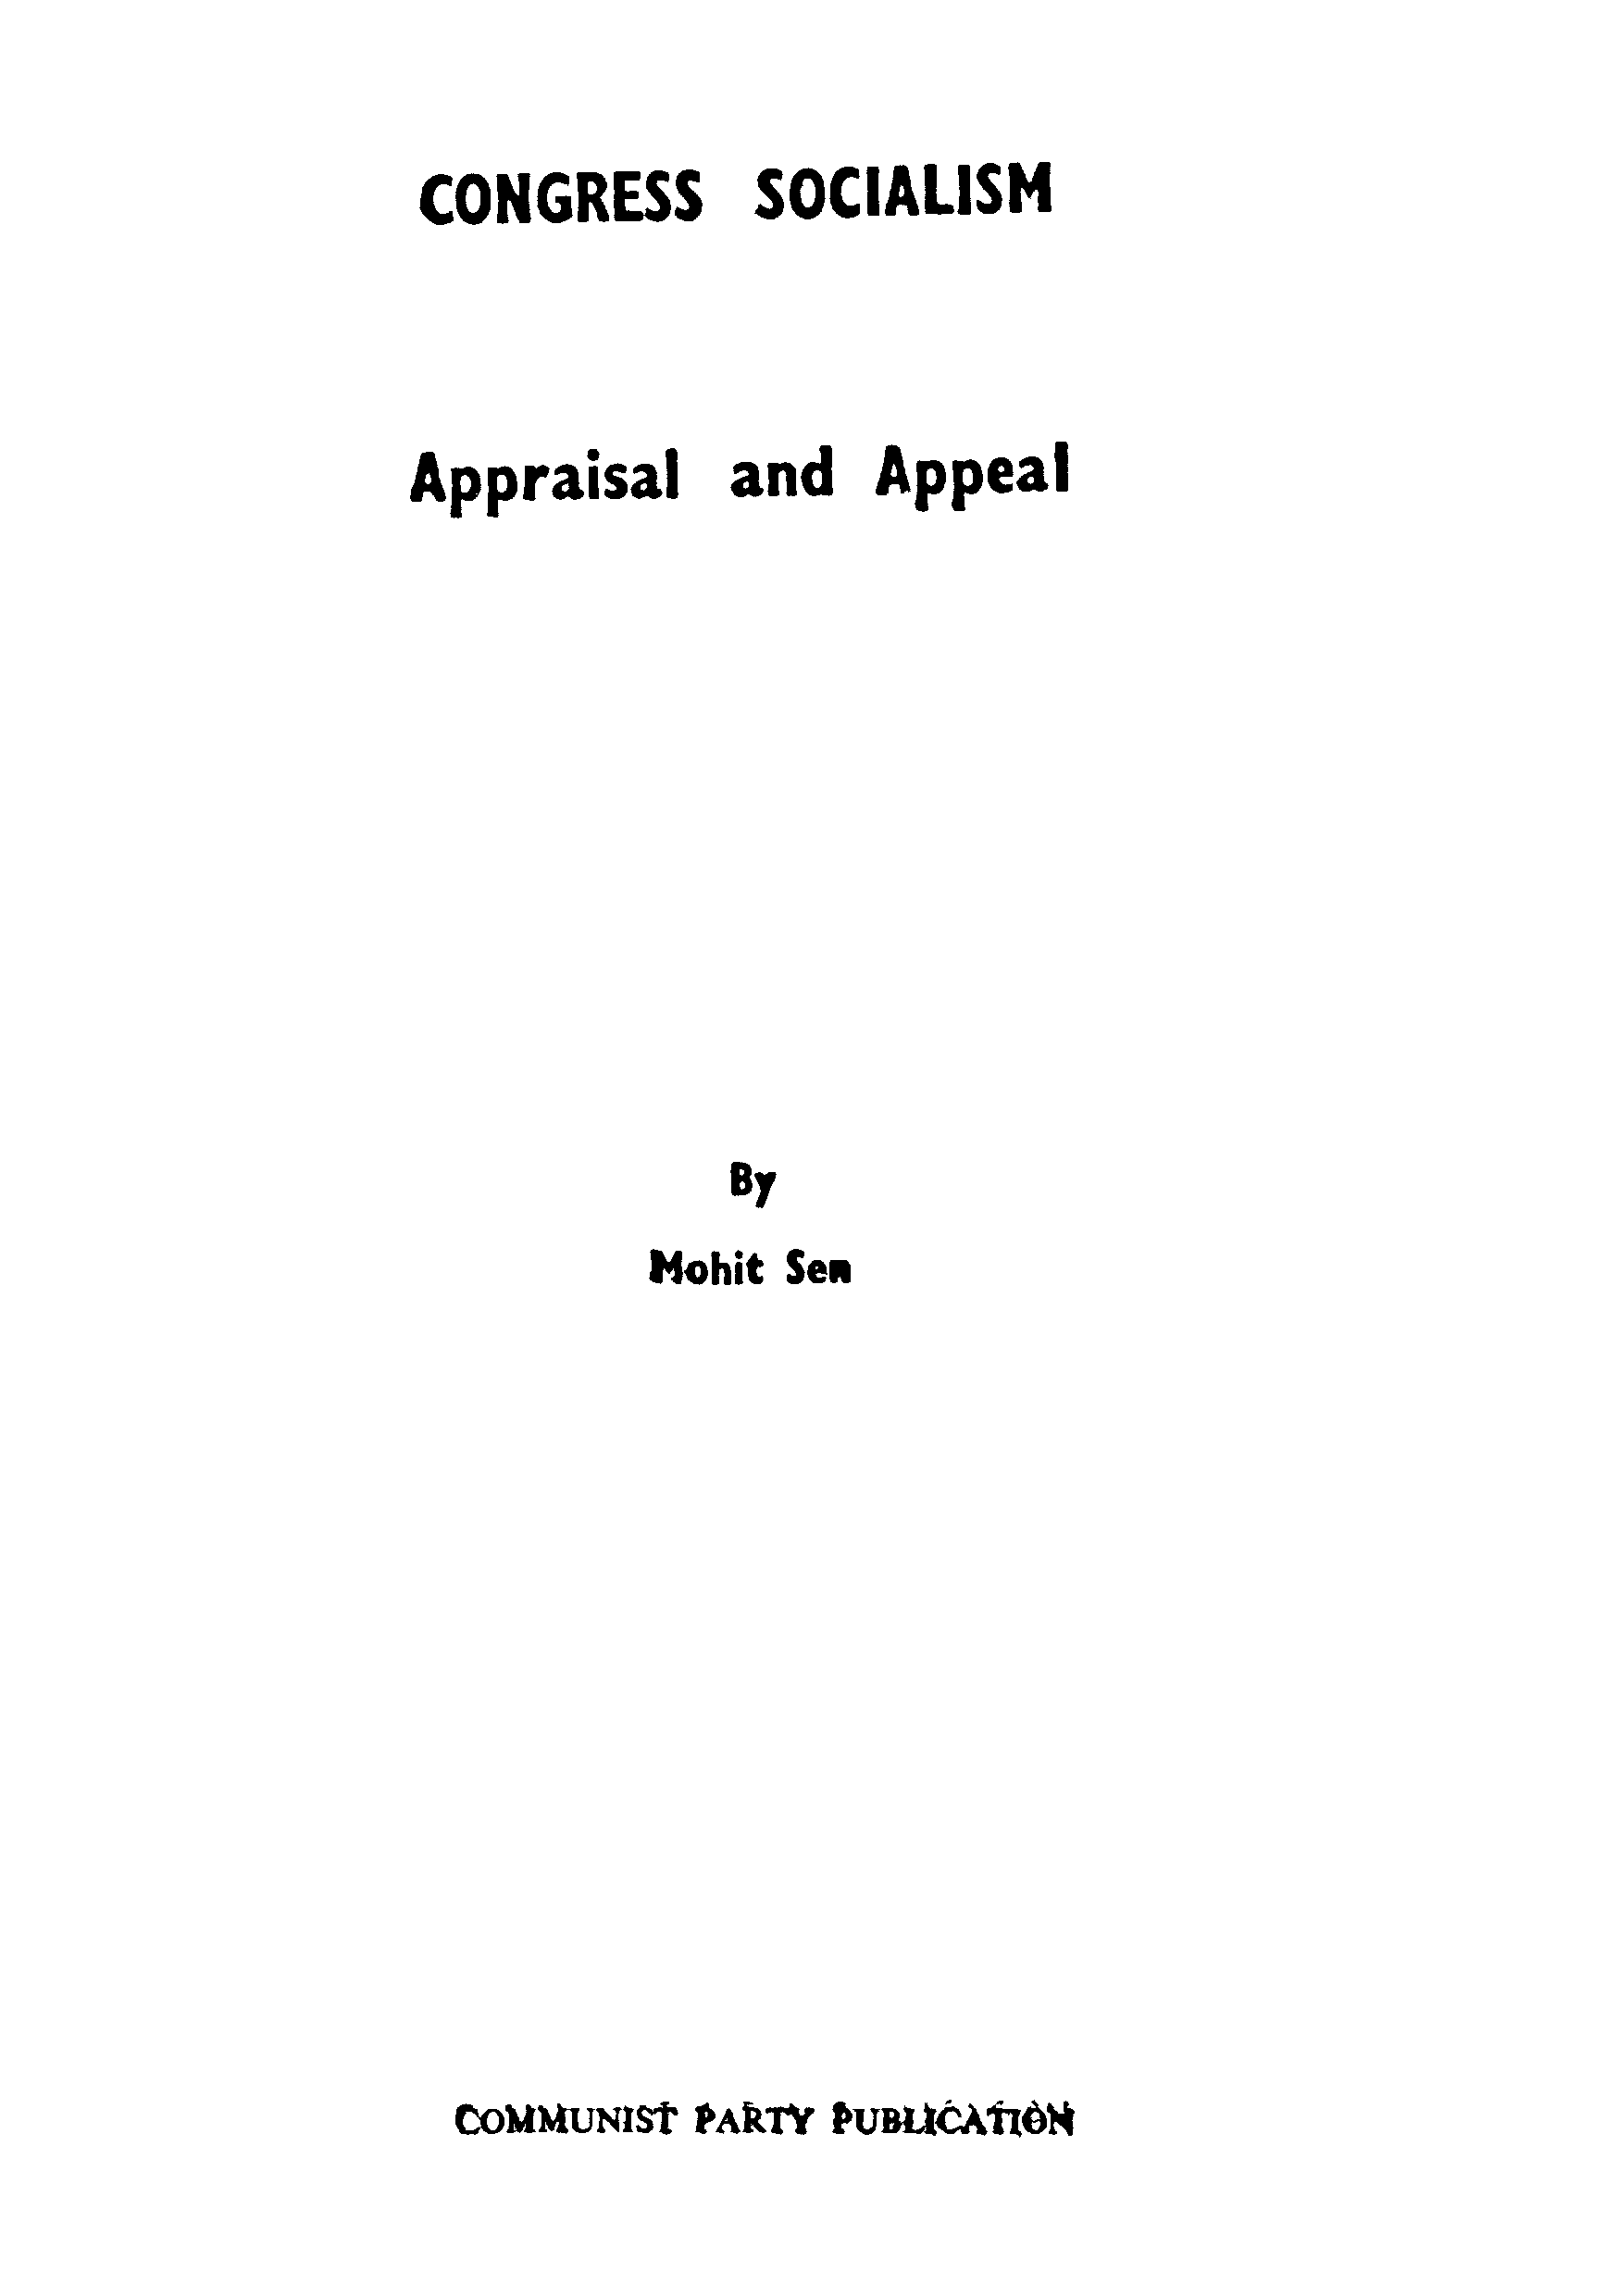 Cogress Socialism Appraisal and Appeal